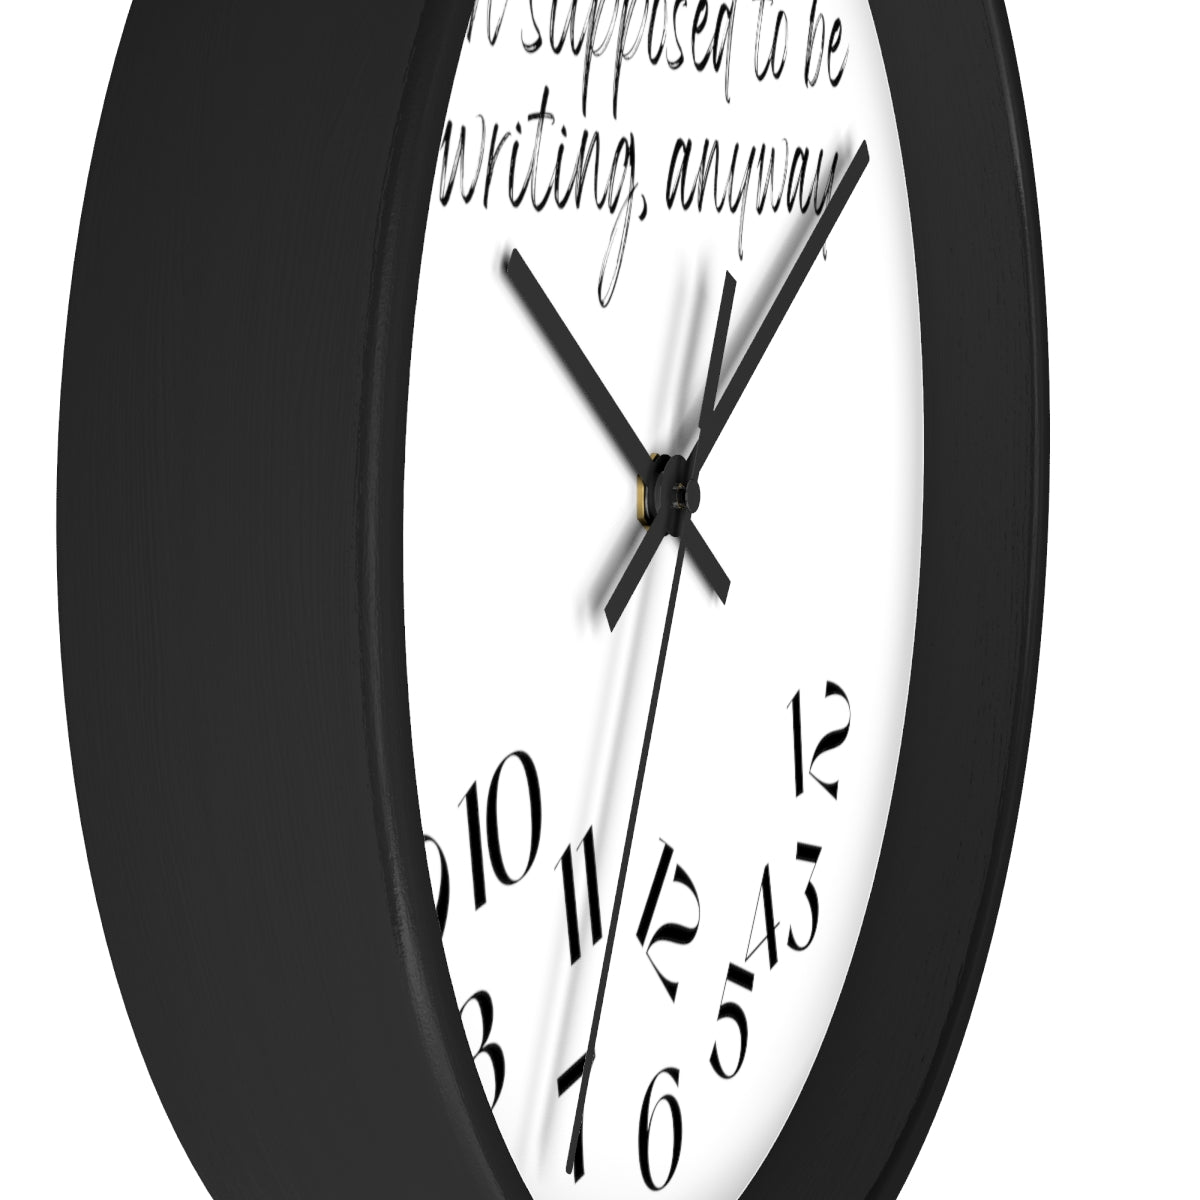 A "I'm Supposed to Be Writing // Writing Themed" wall clock, beautifully designed in black.